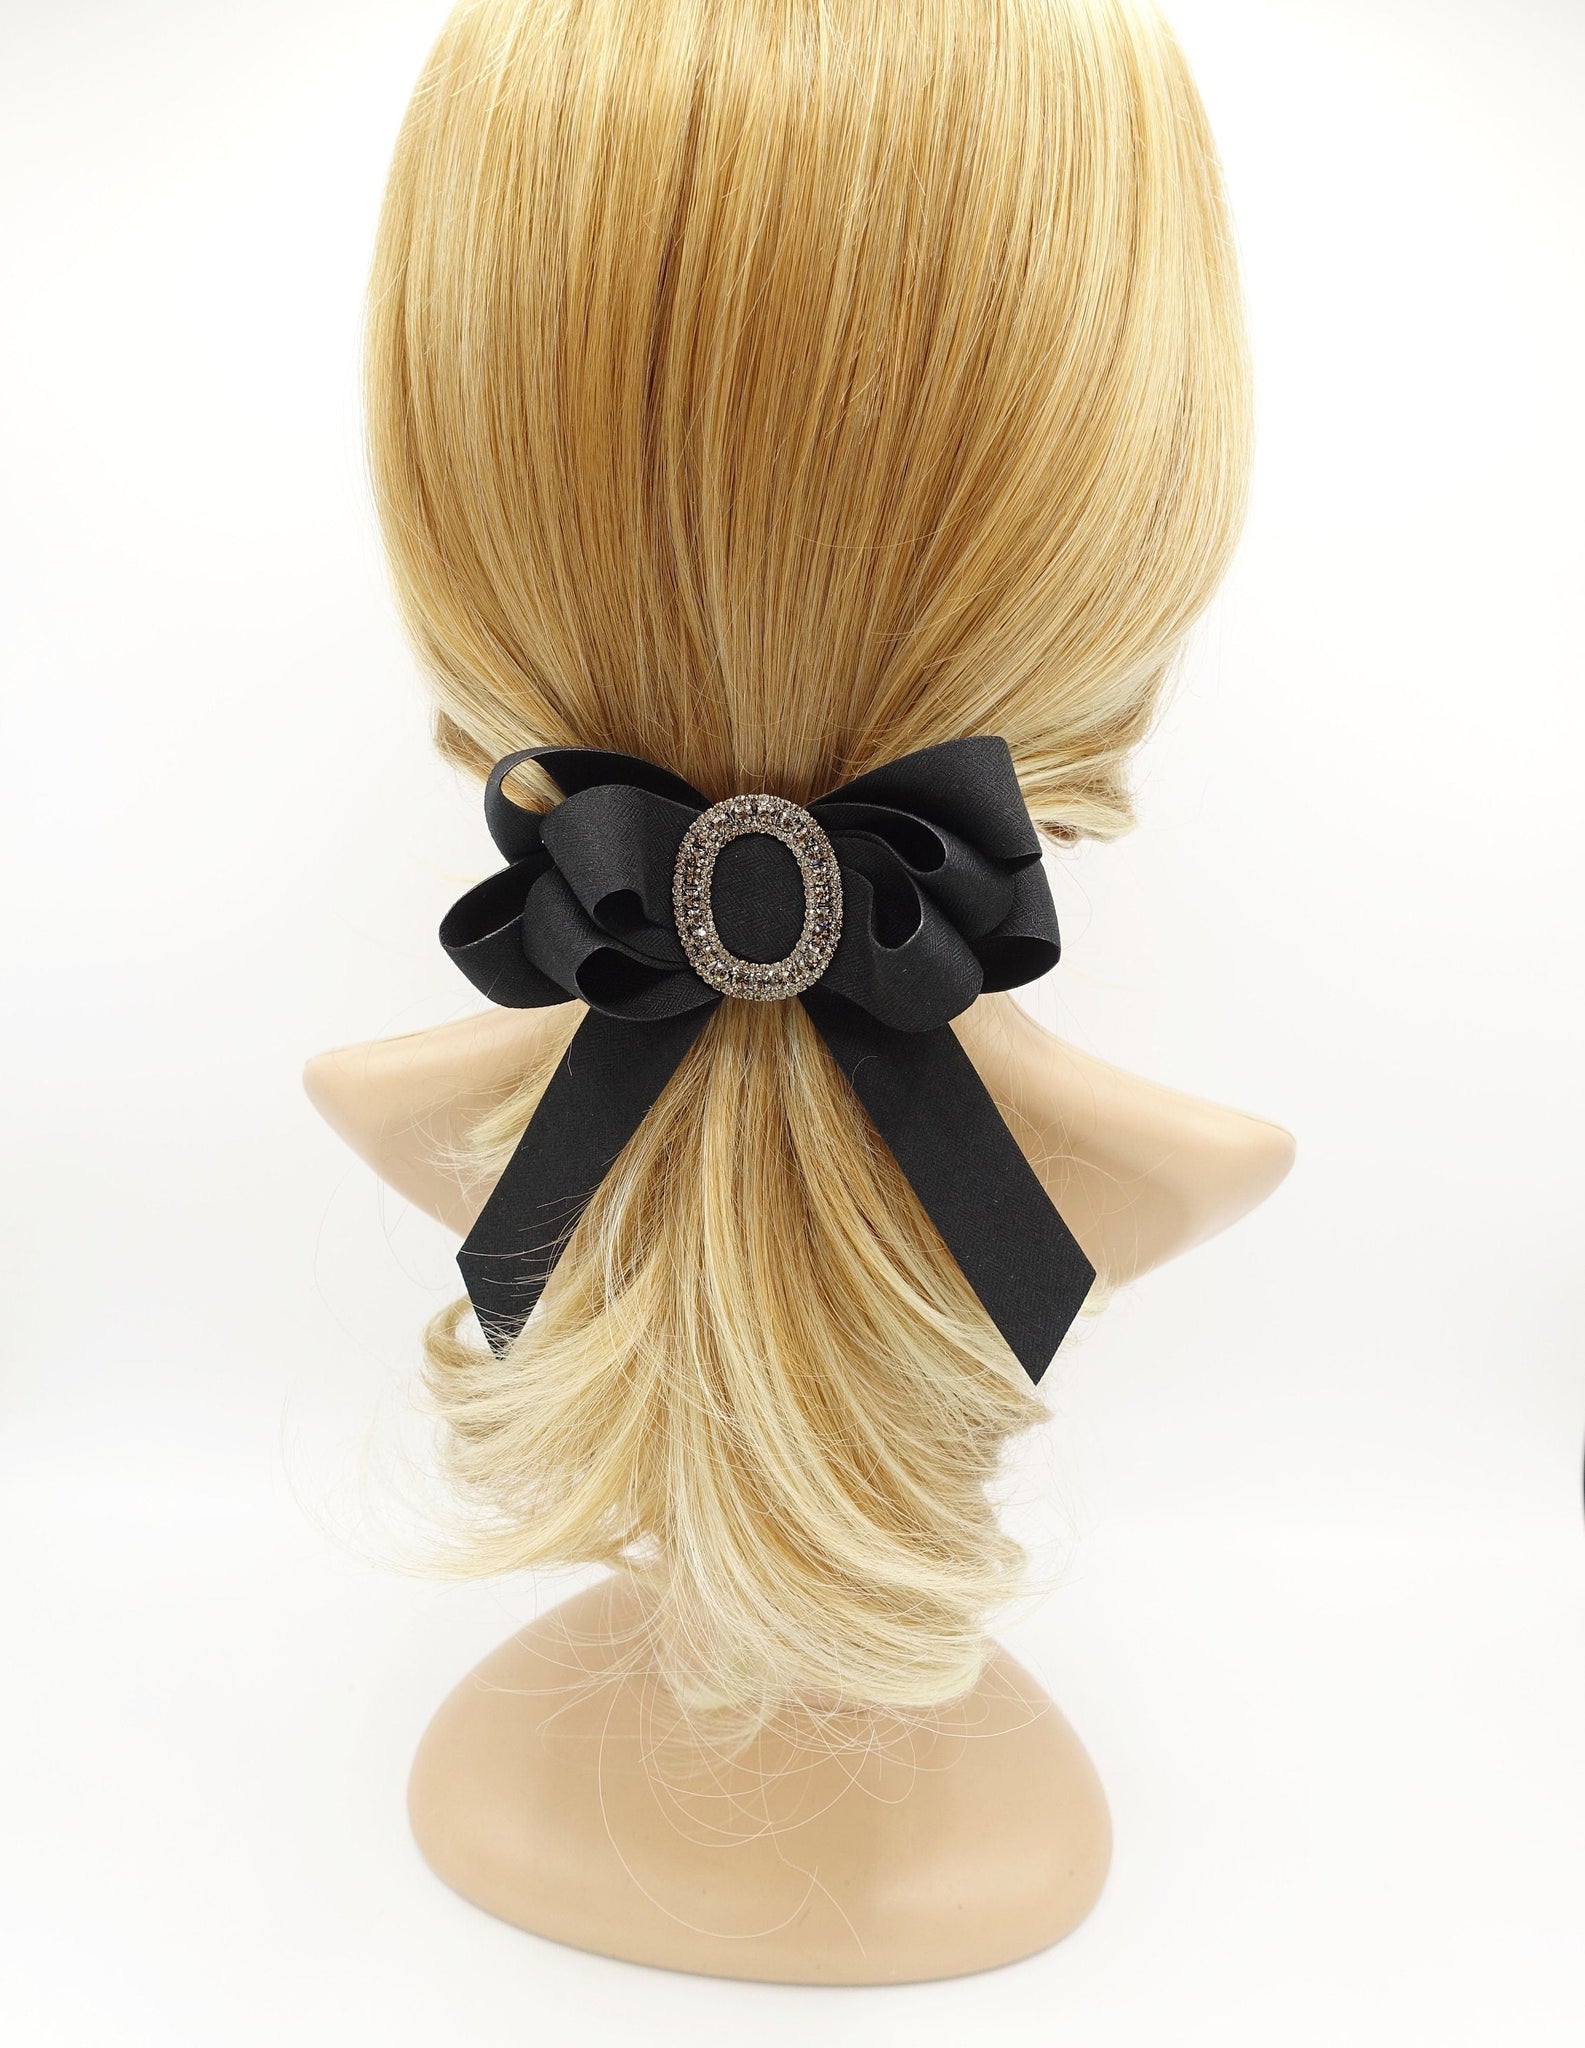 veryshine.com Barrette (Bow) jeweled buckle hair bow layered tail bow french barrette women hair accessory